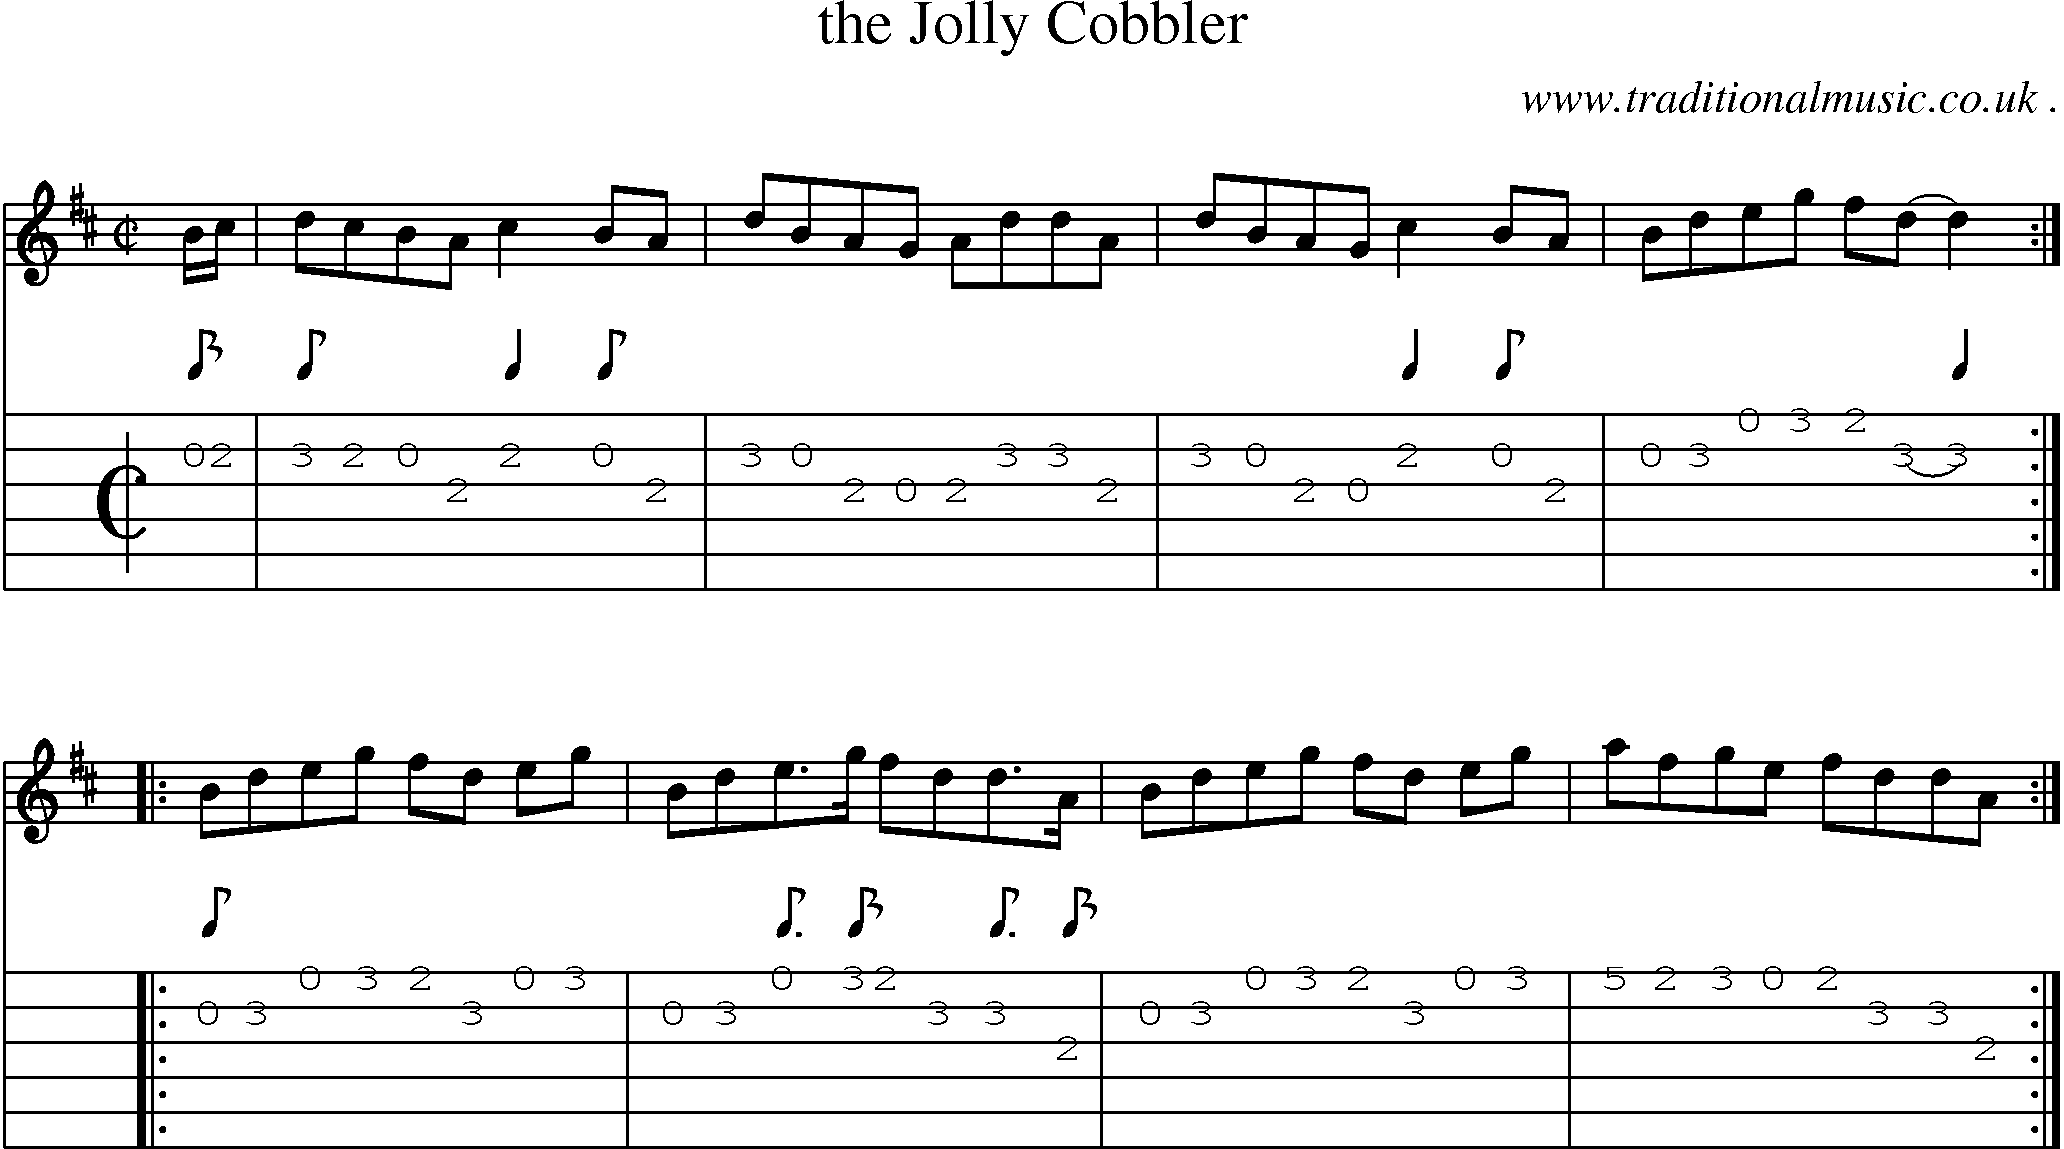 Sheet-Music and Guitar Tabs for The Jolly Cobbler